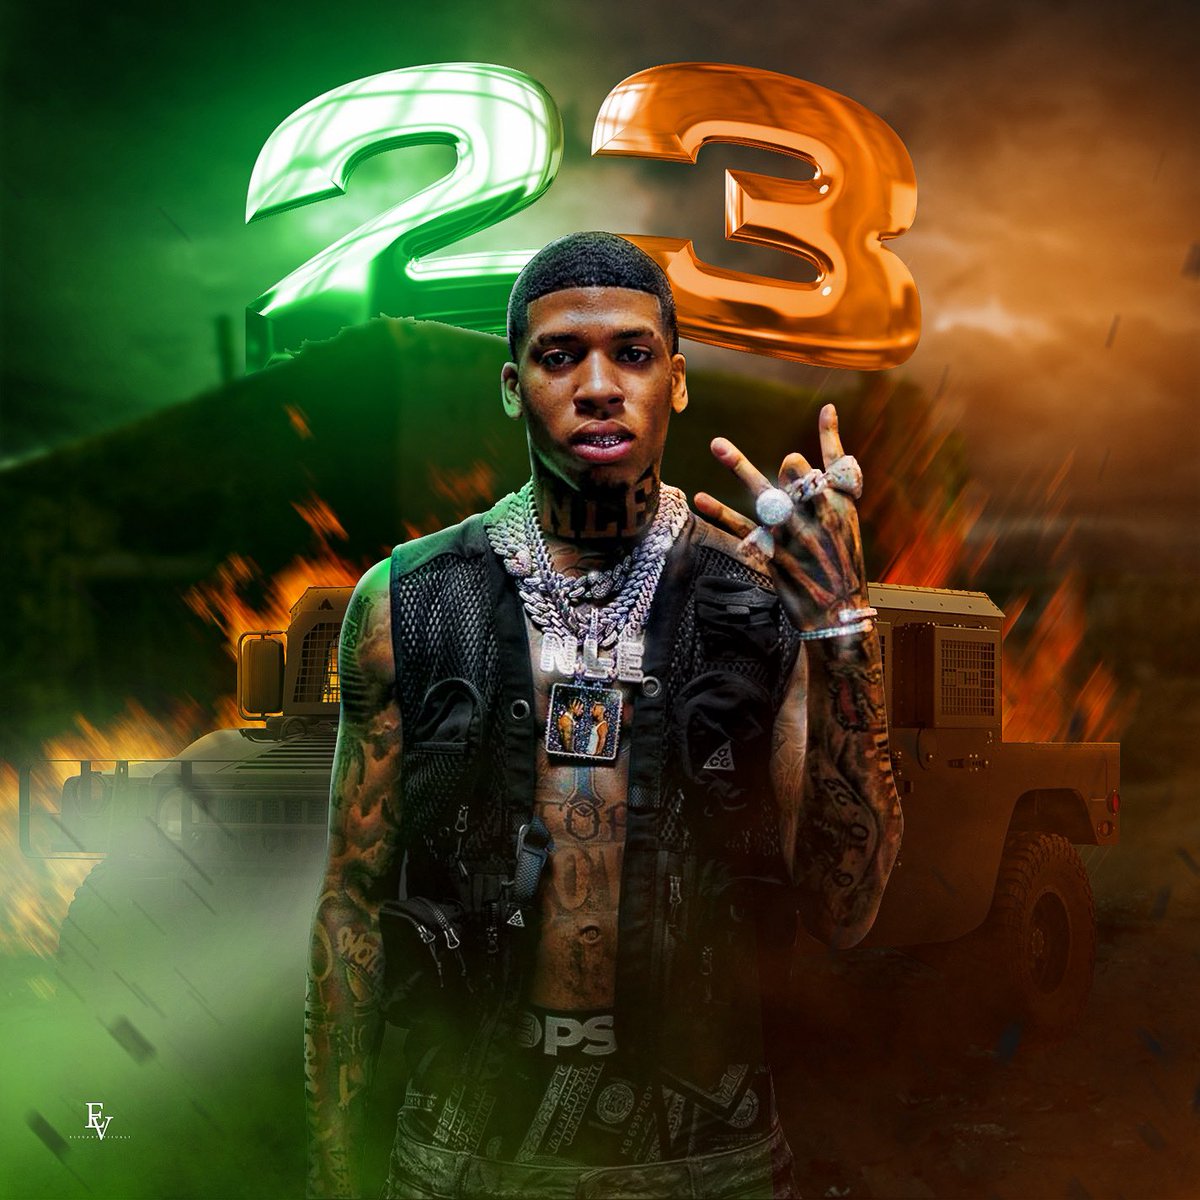 NLE Choppa “23” Concept 

#coverart #upcomingartist #upcomingrappers #unsignedhyped #soundcloudrapper #GraphicDesigner  #trapartist #musicartist #trap #trapmusic #elegantvisuals